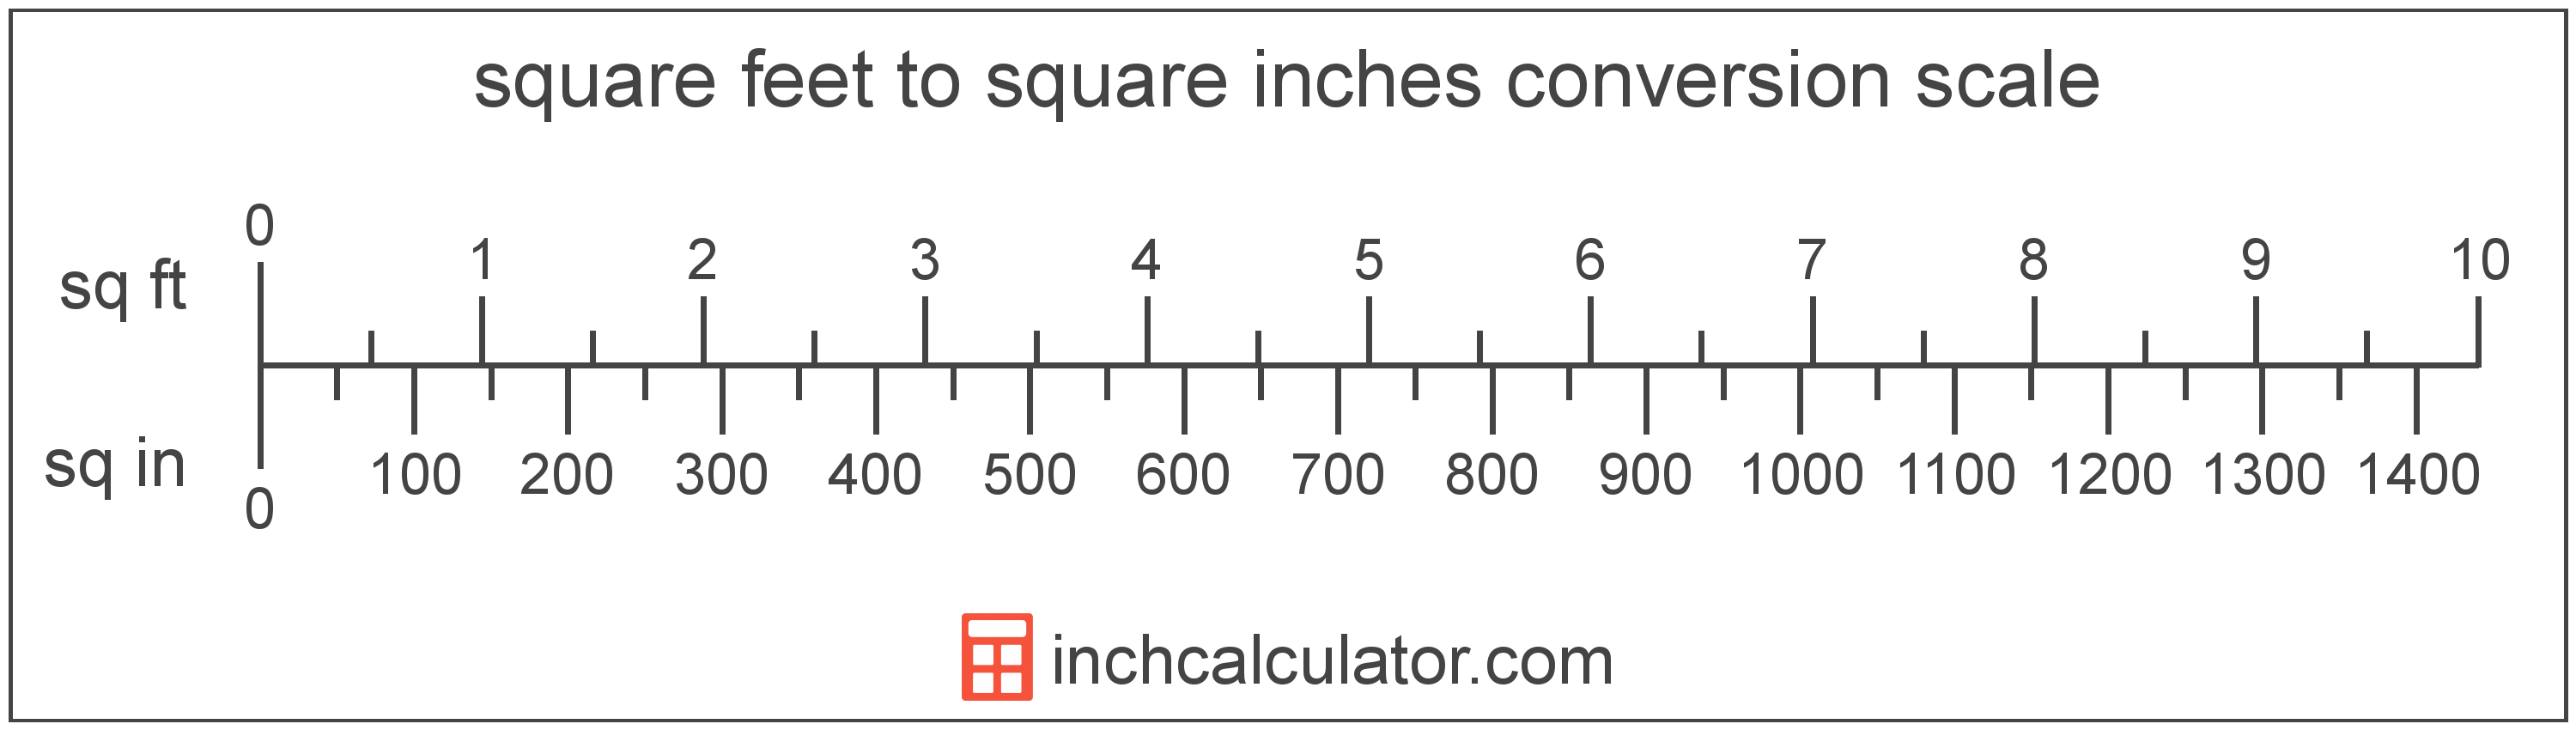 conversion scale showing square inches and equivalent square feet area values